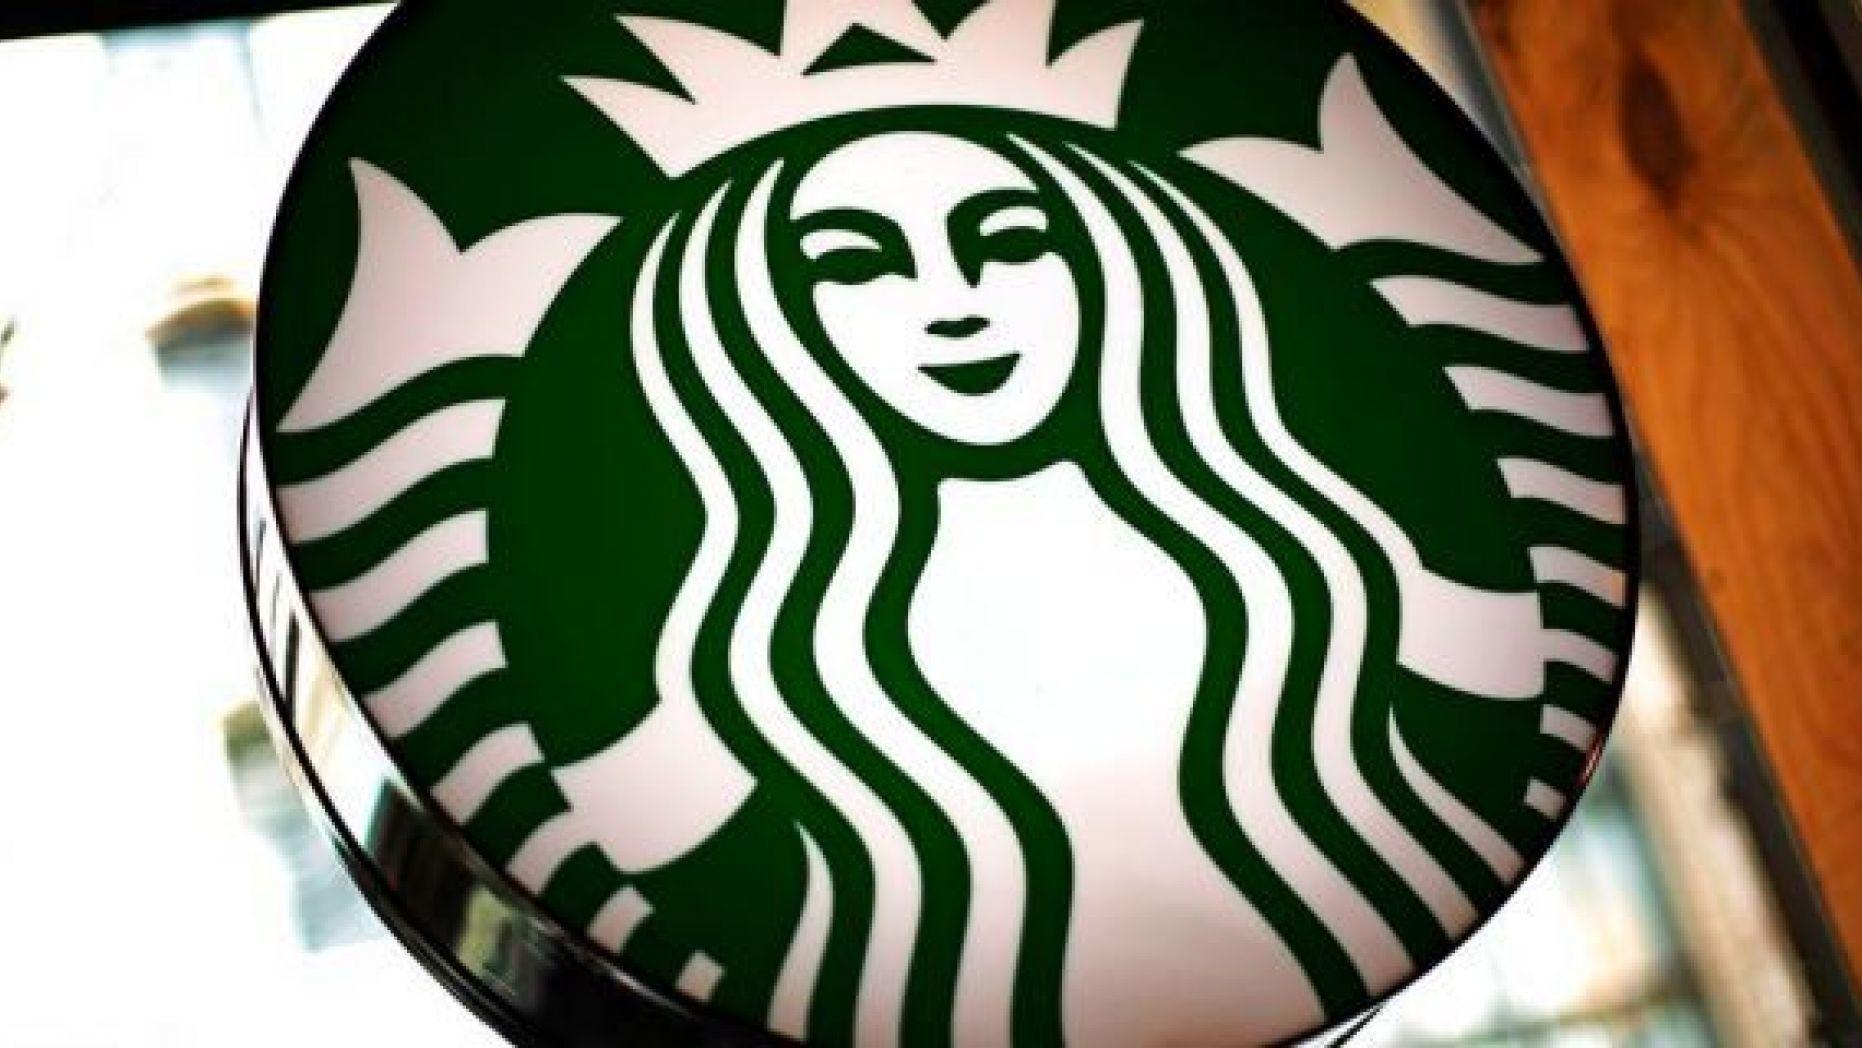 Fake Starbucks Logo - Fake coupons emerge after Starbucks incident in Philly | Fox News